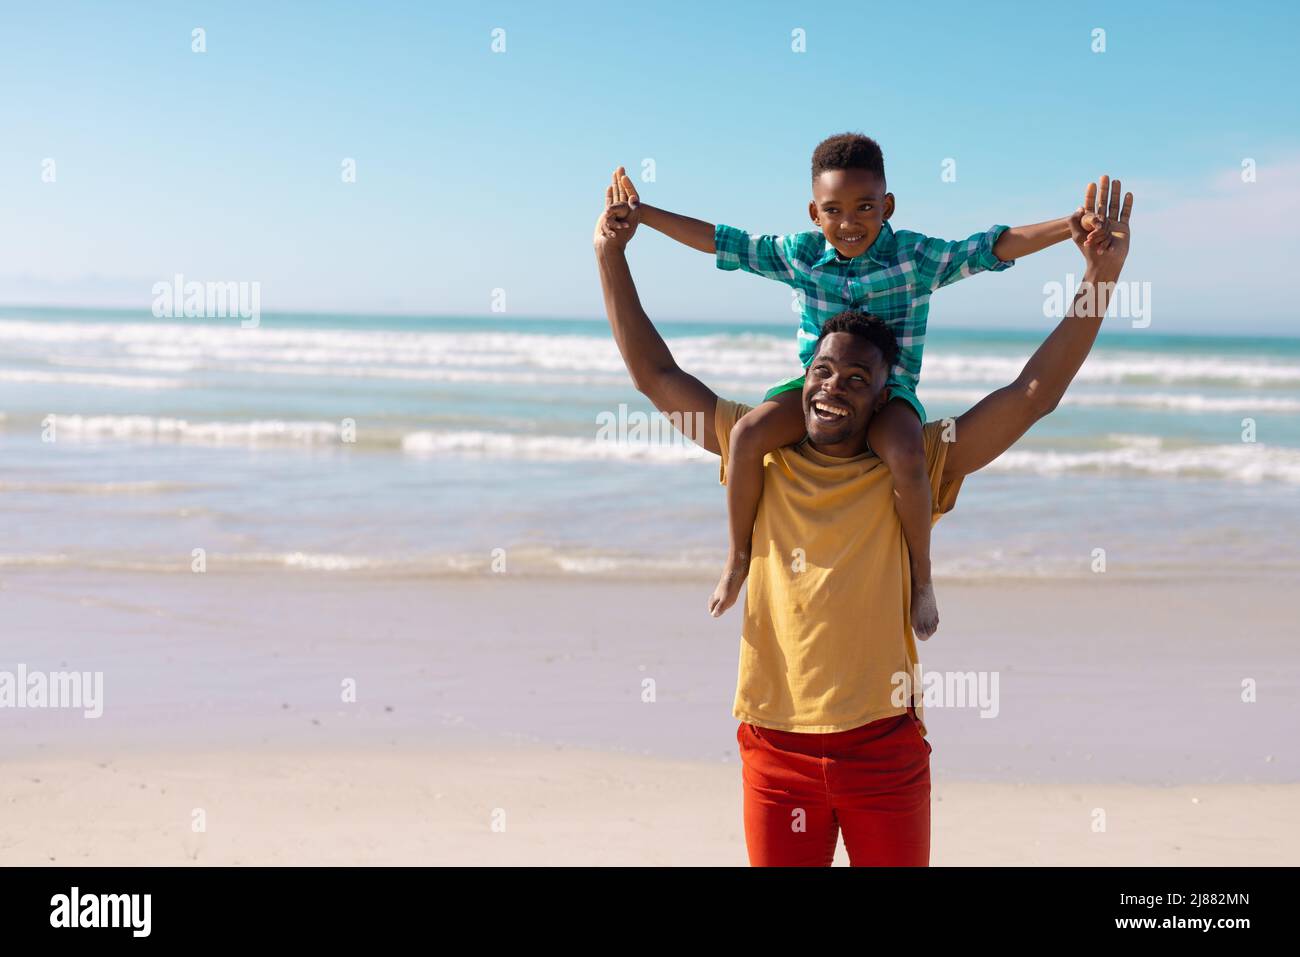 Cheerful african american young man carrying son on shoulders standing against sea and blue sky Stock Photo